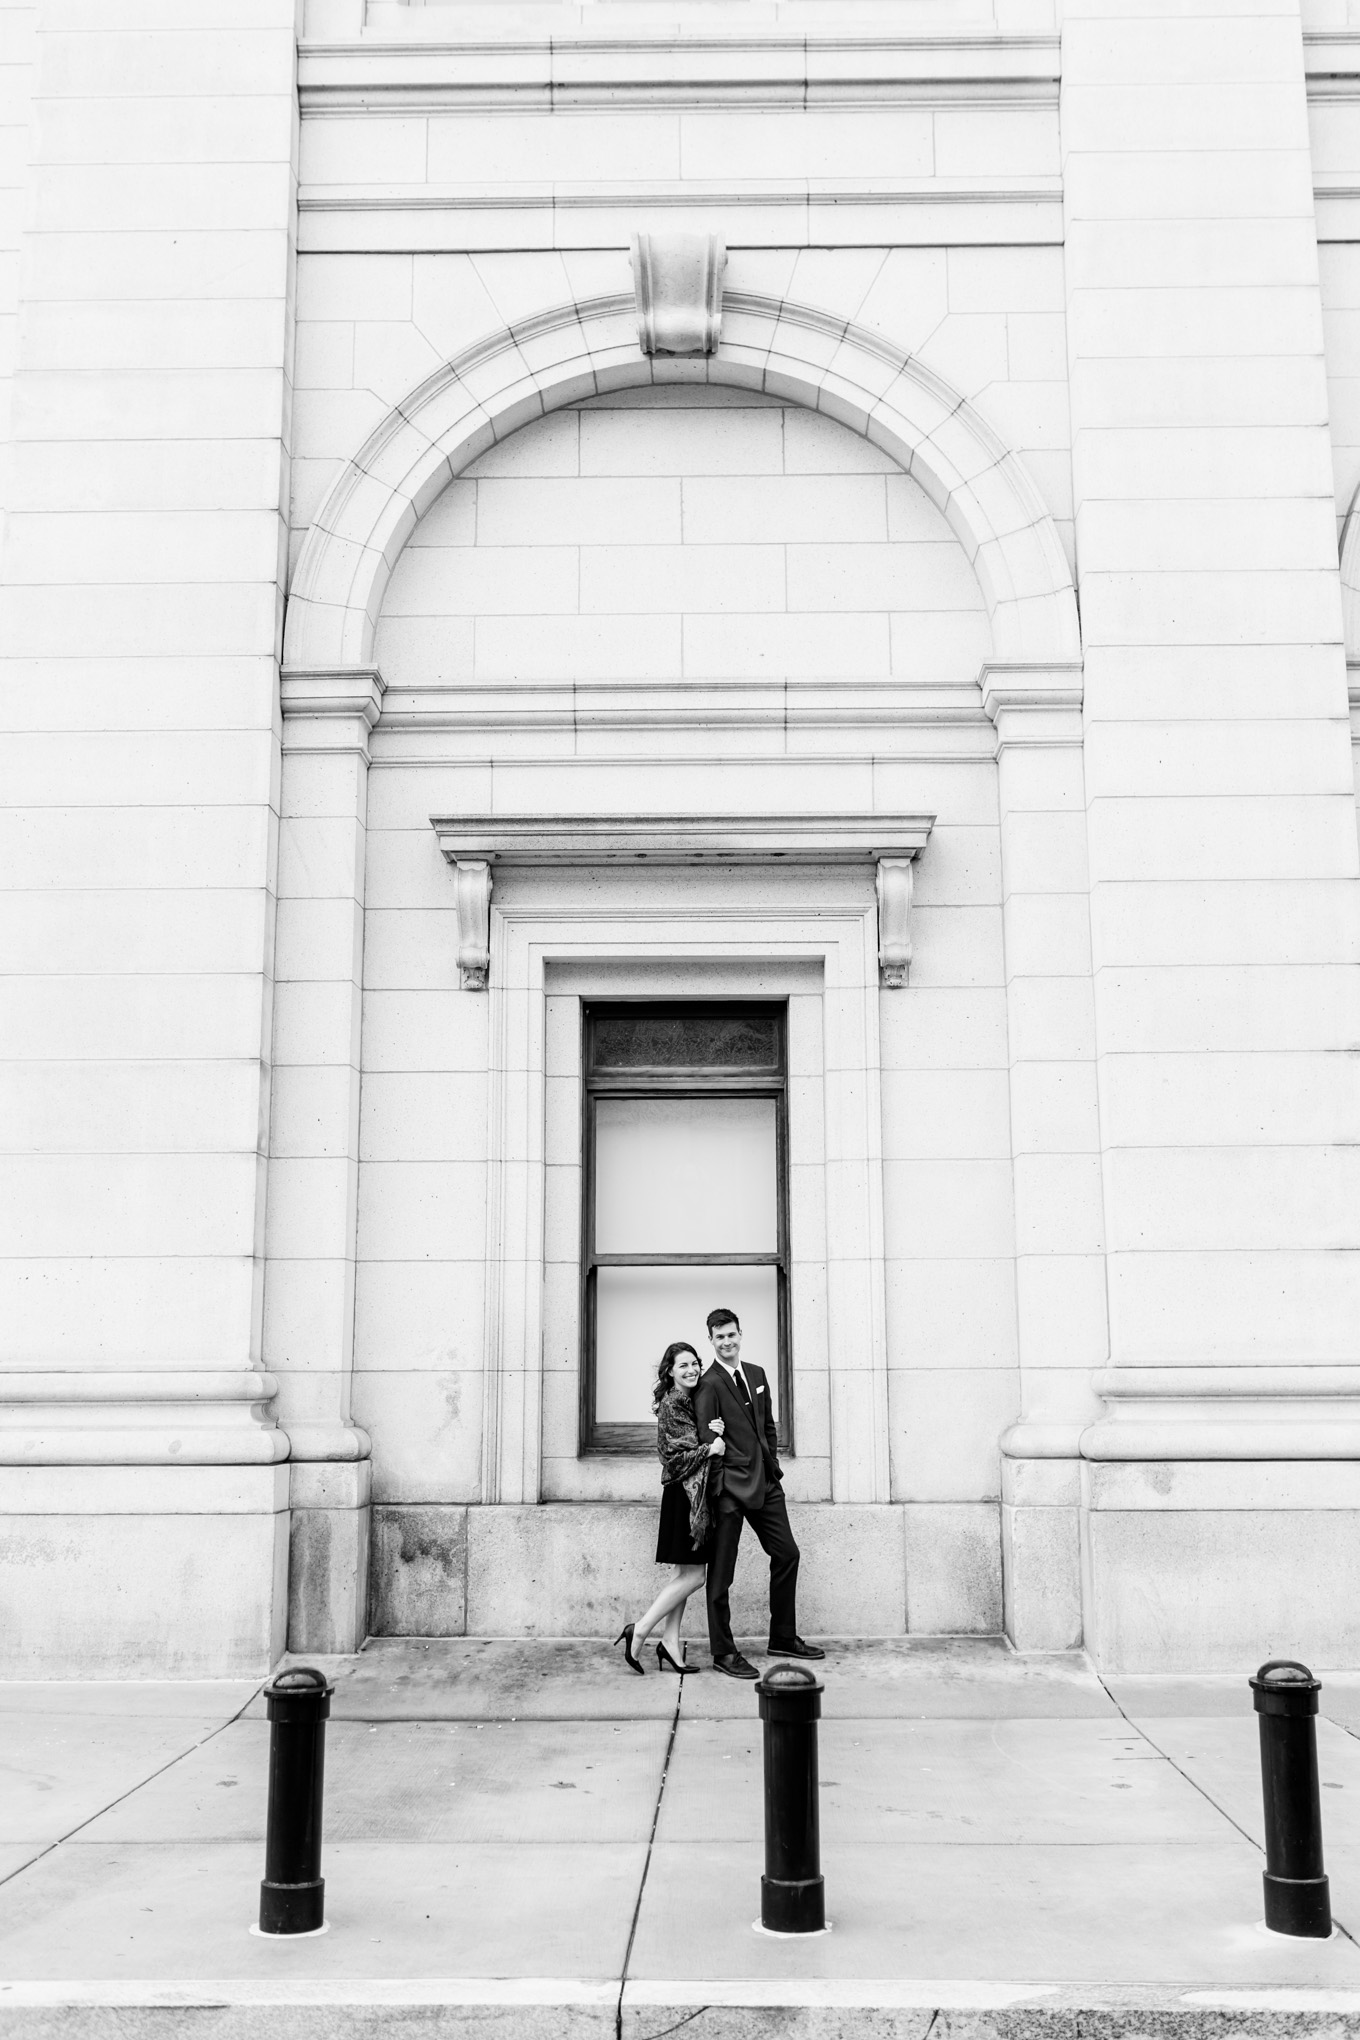 black and white engagement photos, black and white photography, black and white photos, engagement photos, black and white D.C., D.C. engagement photos, classic engagement photos, traditional engagement photos, engagement photos poses, classic architecture, D.C. architecture, Union Station D.C., Union Station, engaged couple, relationship goals, joyful couple, black and white sessions, epic portrait